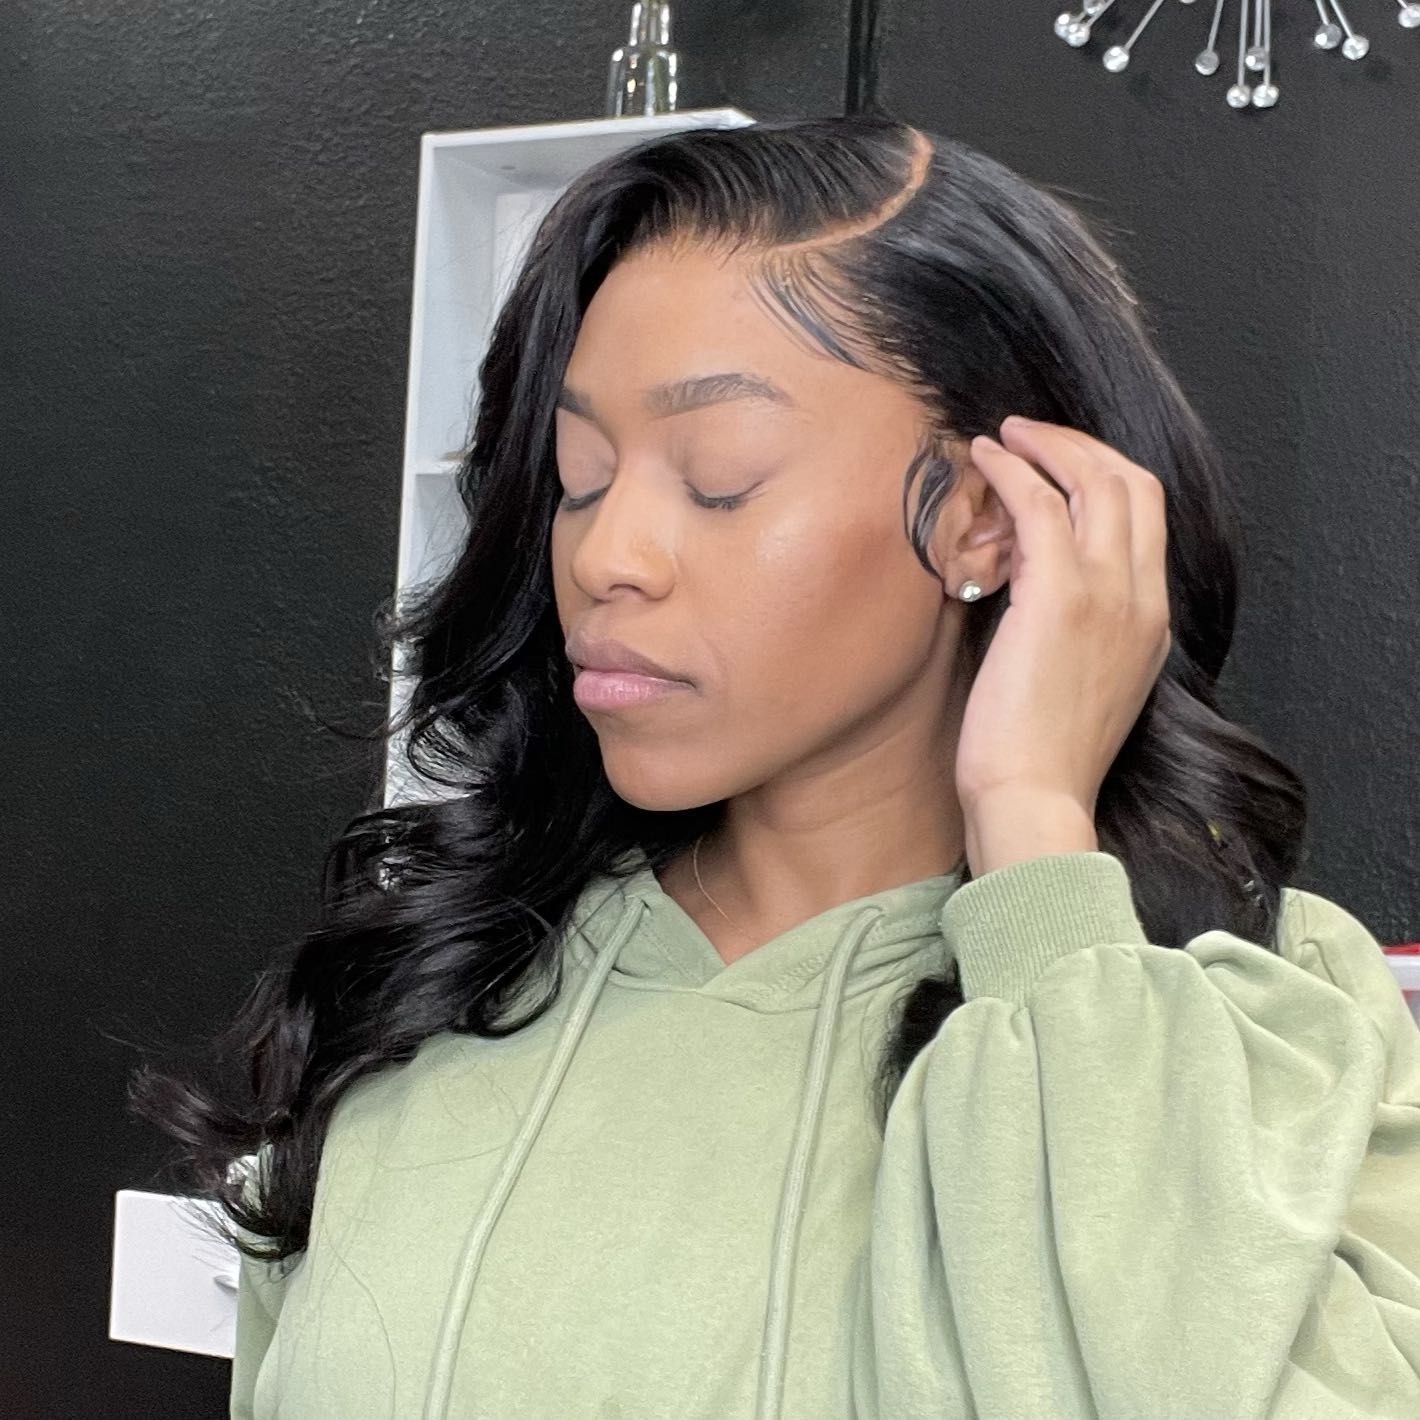 Frontal Weave Sew-In,With Natural Hair Shampoo portfolio